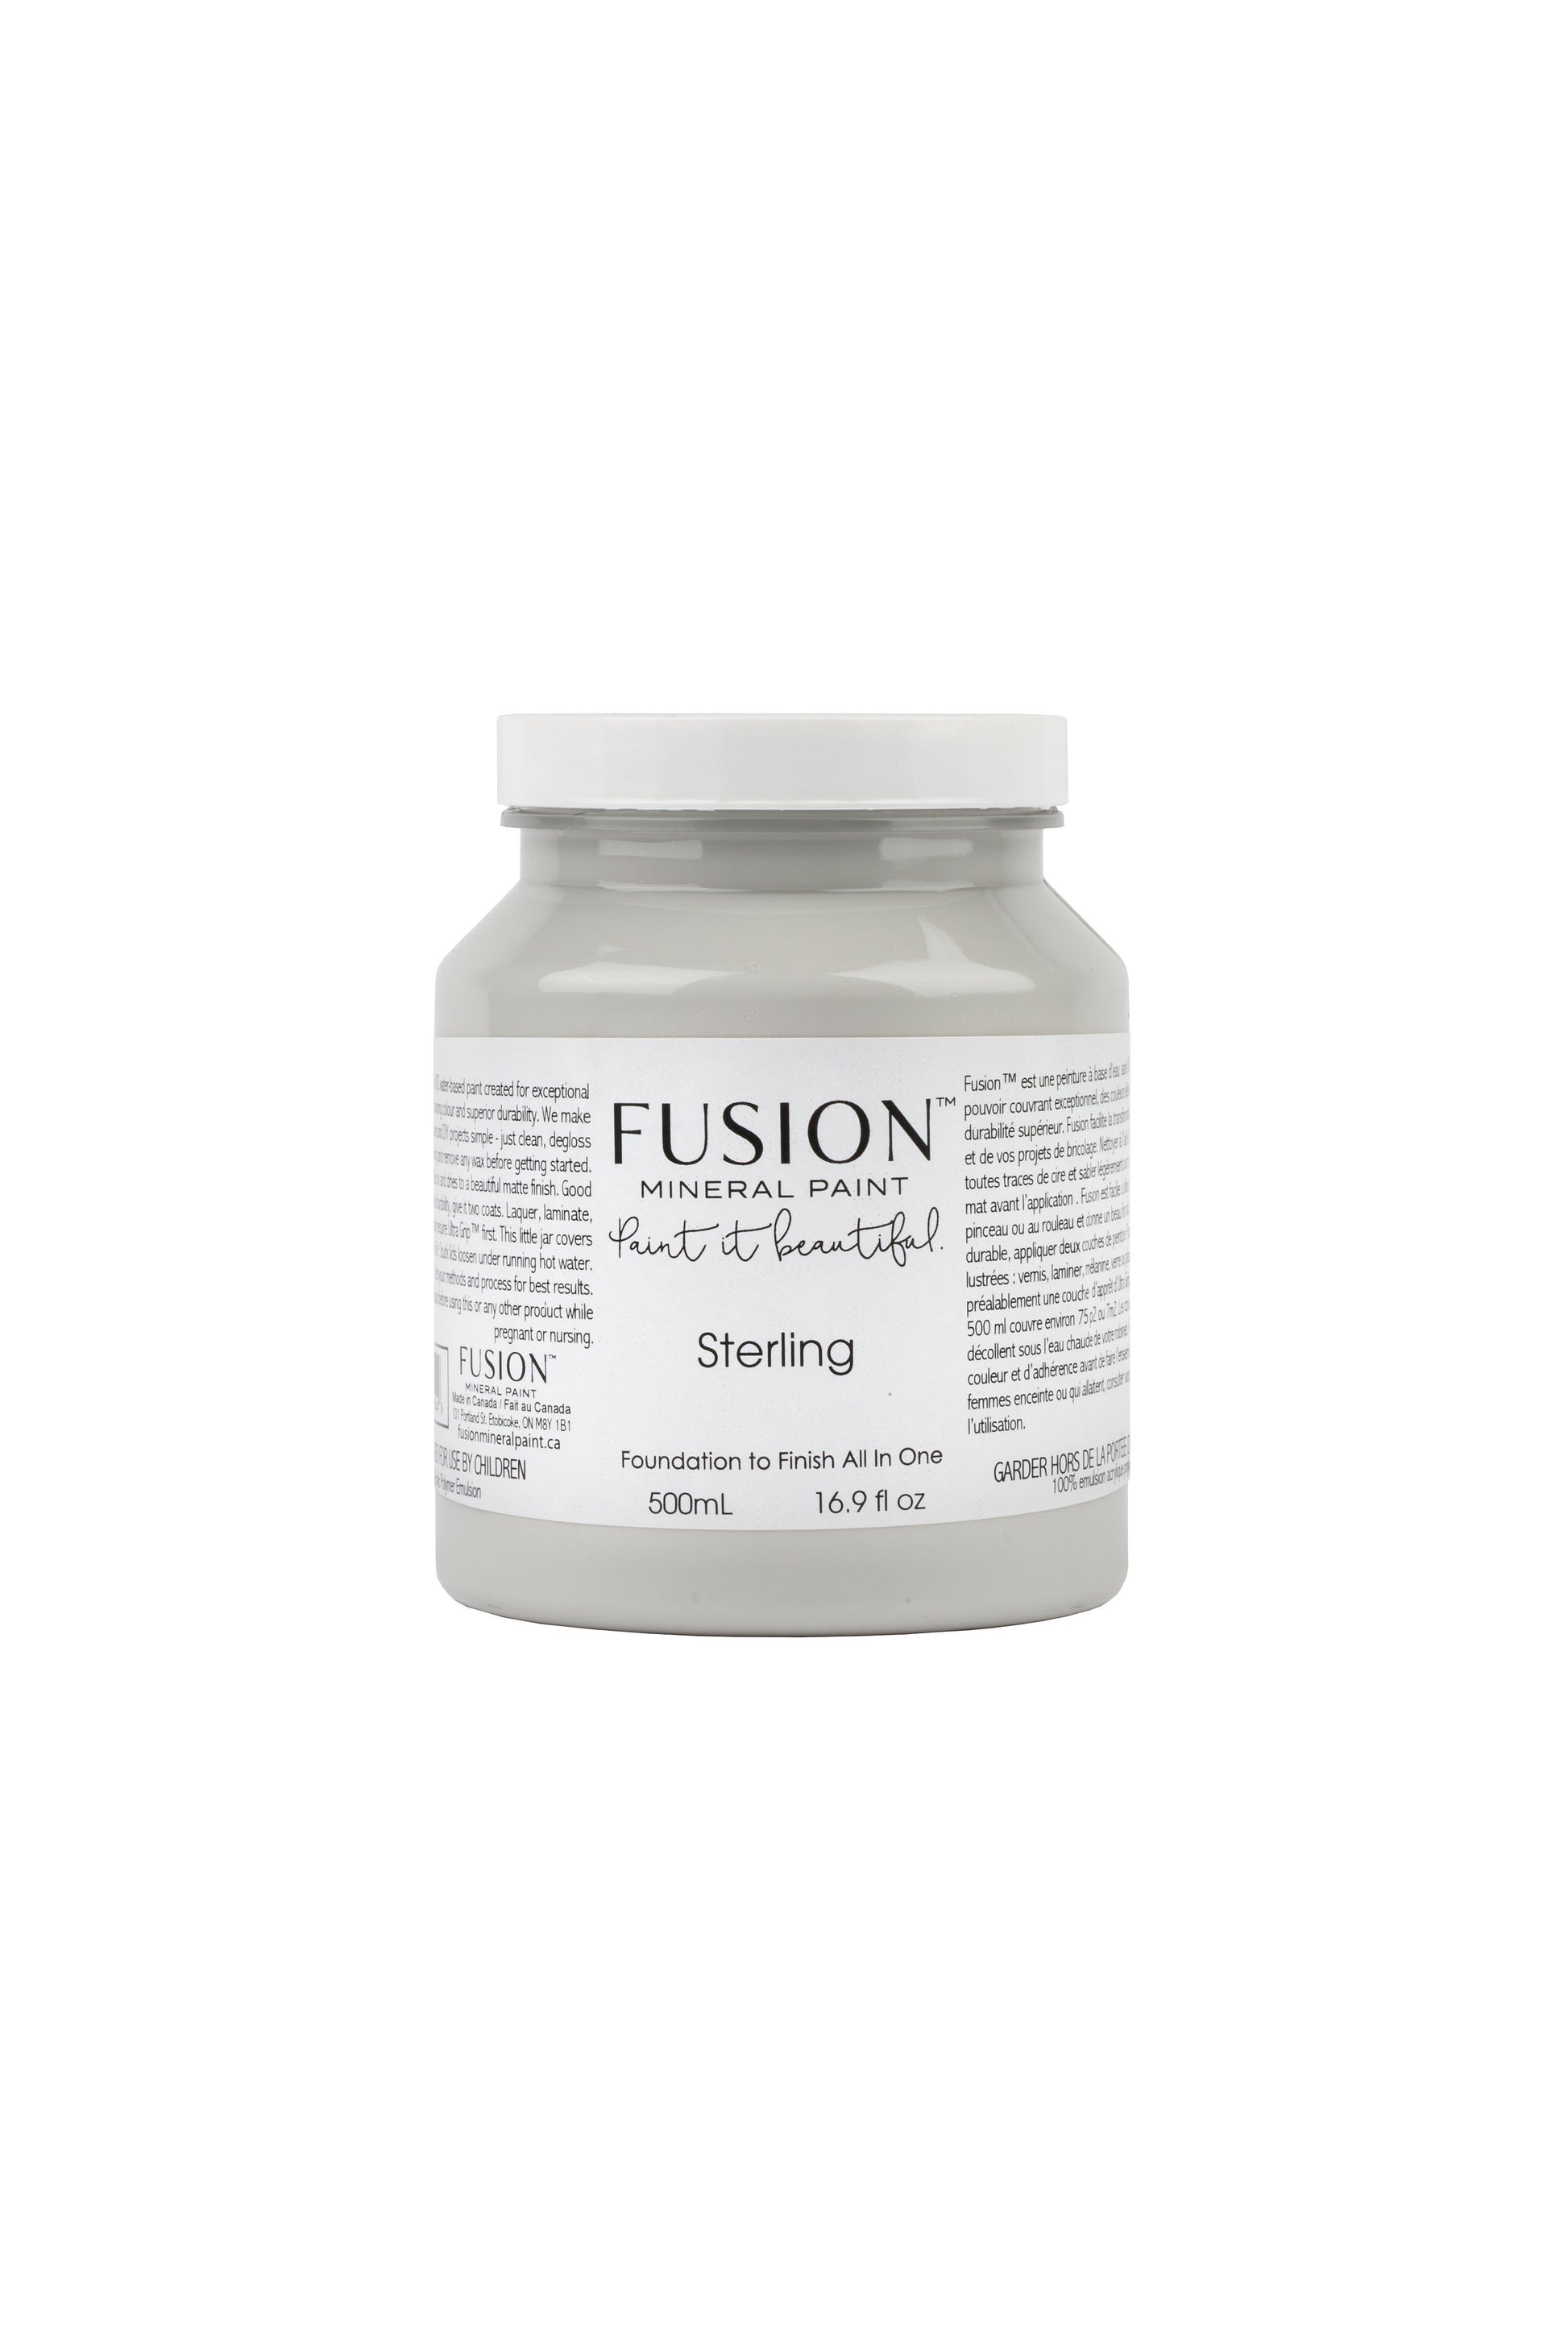 Sterling Fusion Mineral Paint, Silver-Grey Paint Color| 500ml Pint Size